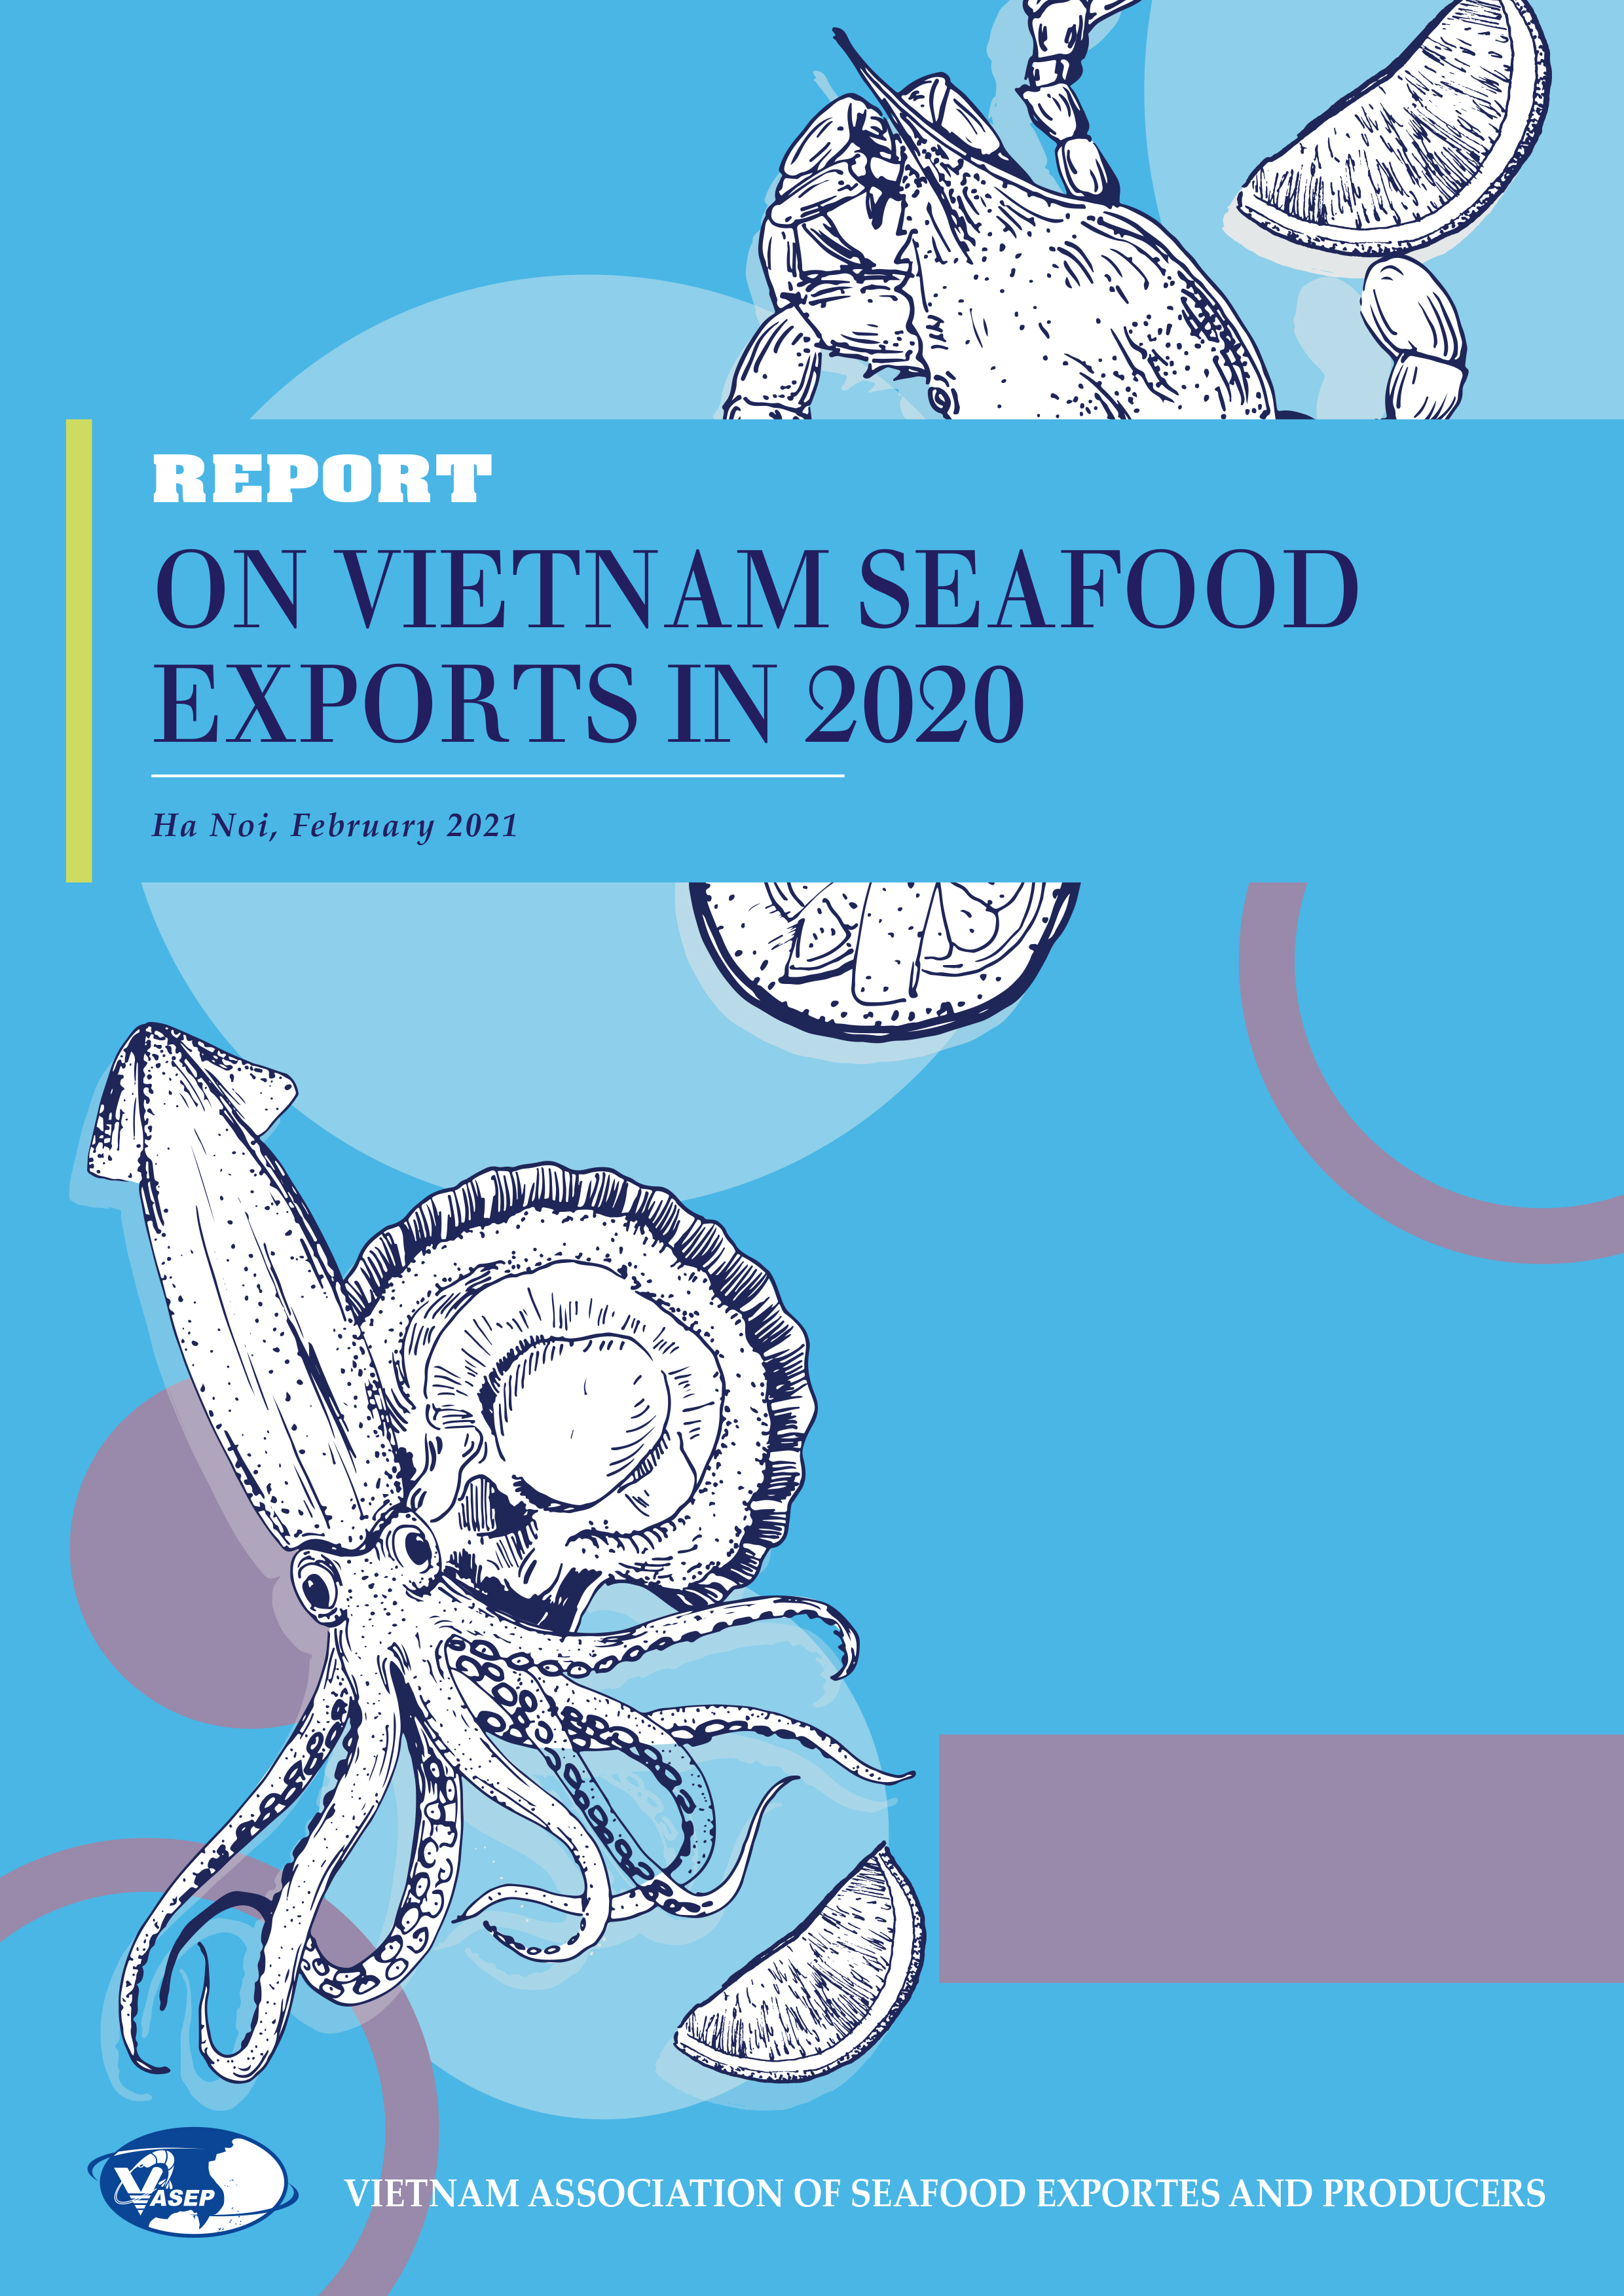 VASEP’s report on Vietnam seafood exports in 2020 and forecast on 2021 performance 